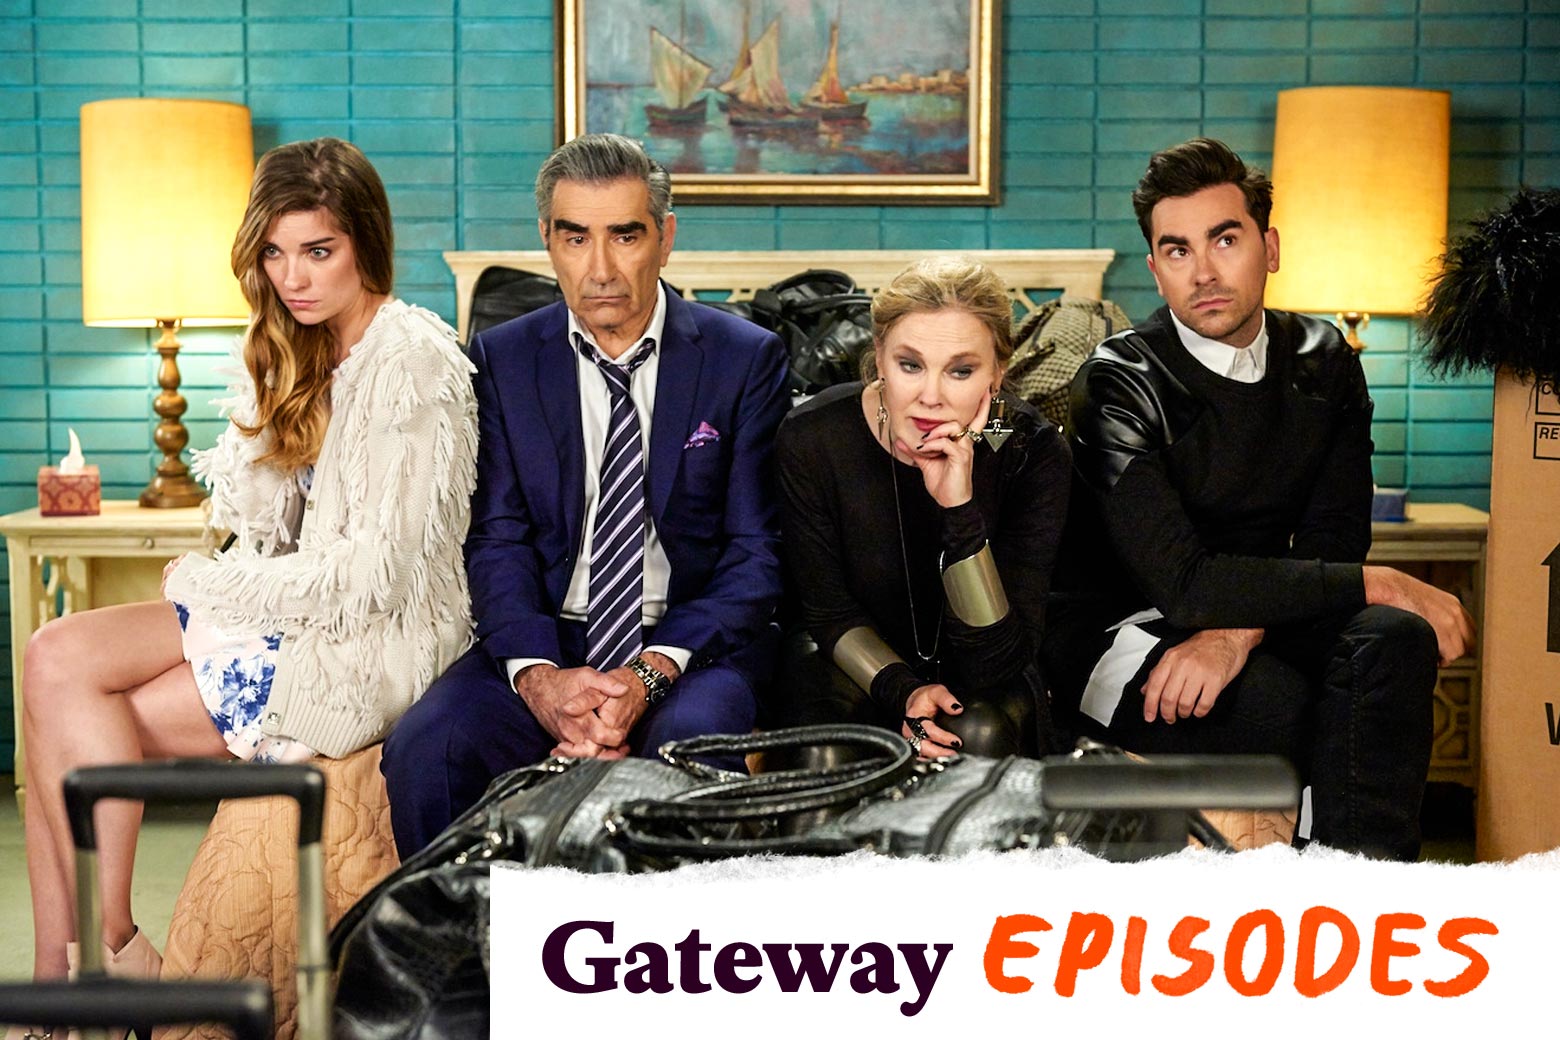 Annie Murphy, Eugene Levy, Catherine O'Hara, and Dan Levy sit on a motel bed in this still from Schitt's Creek.